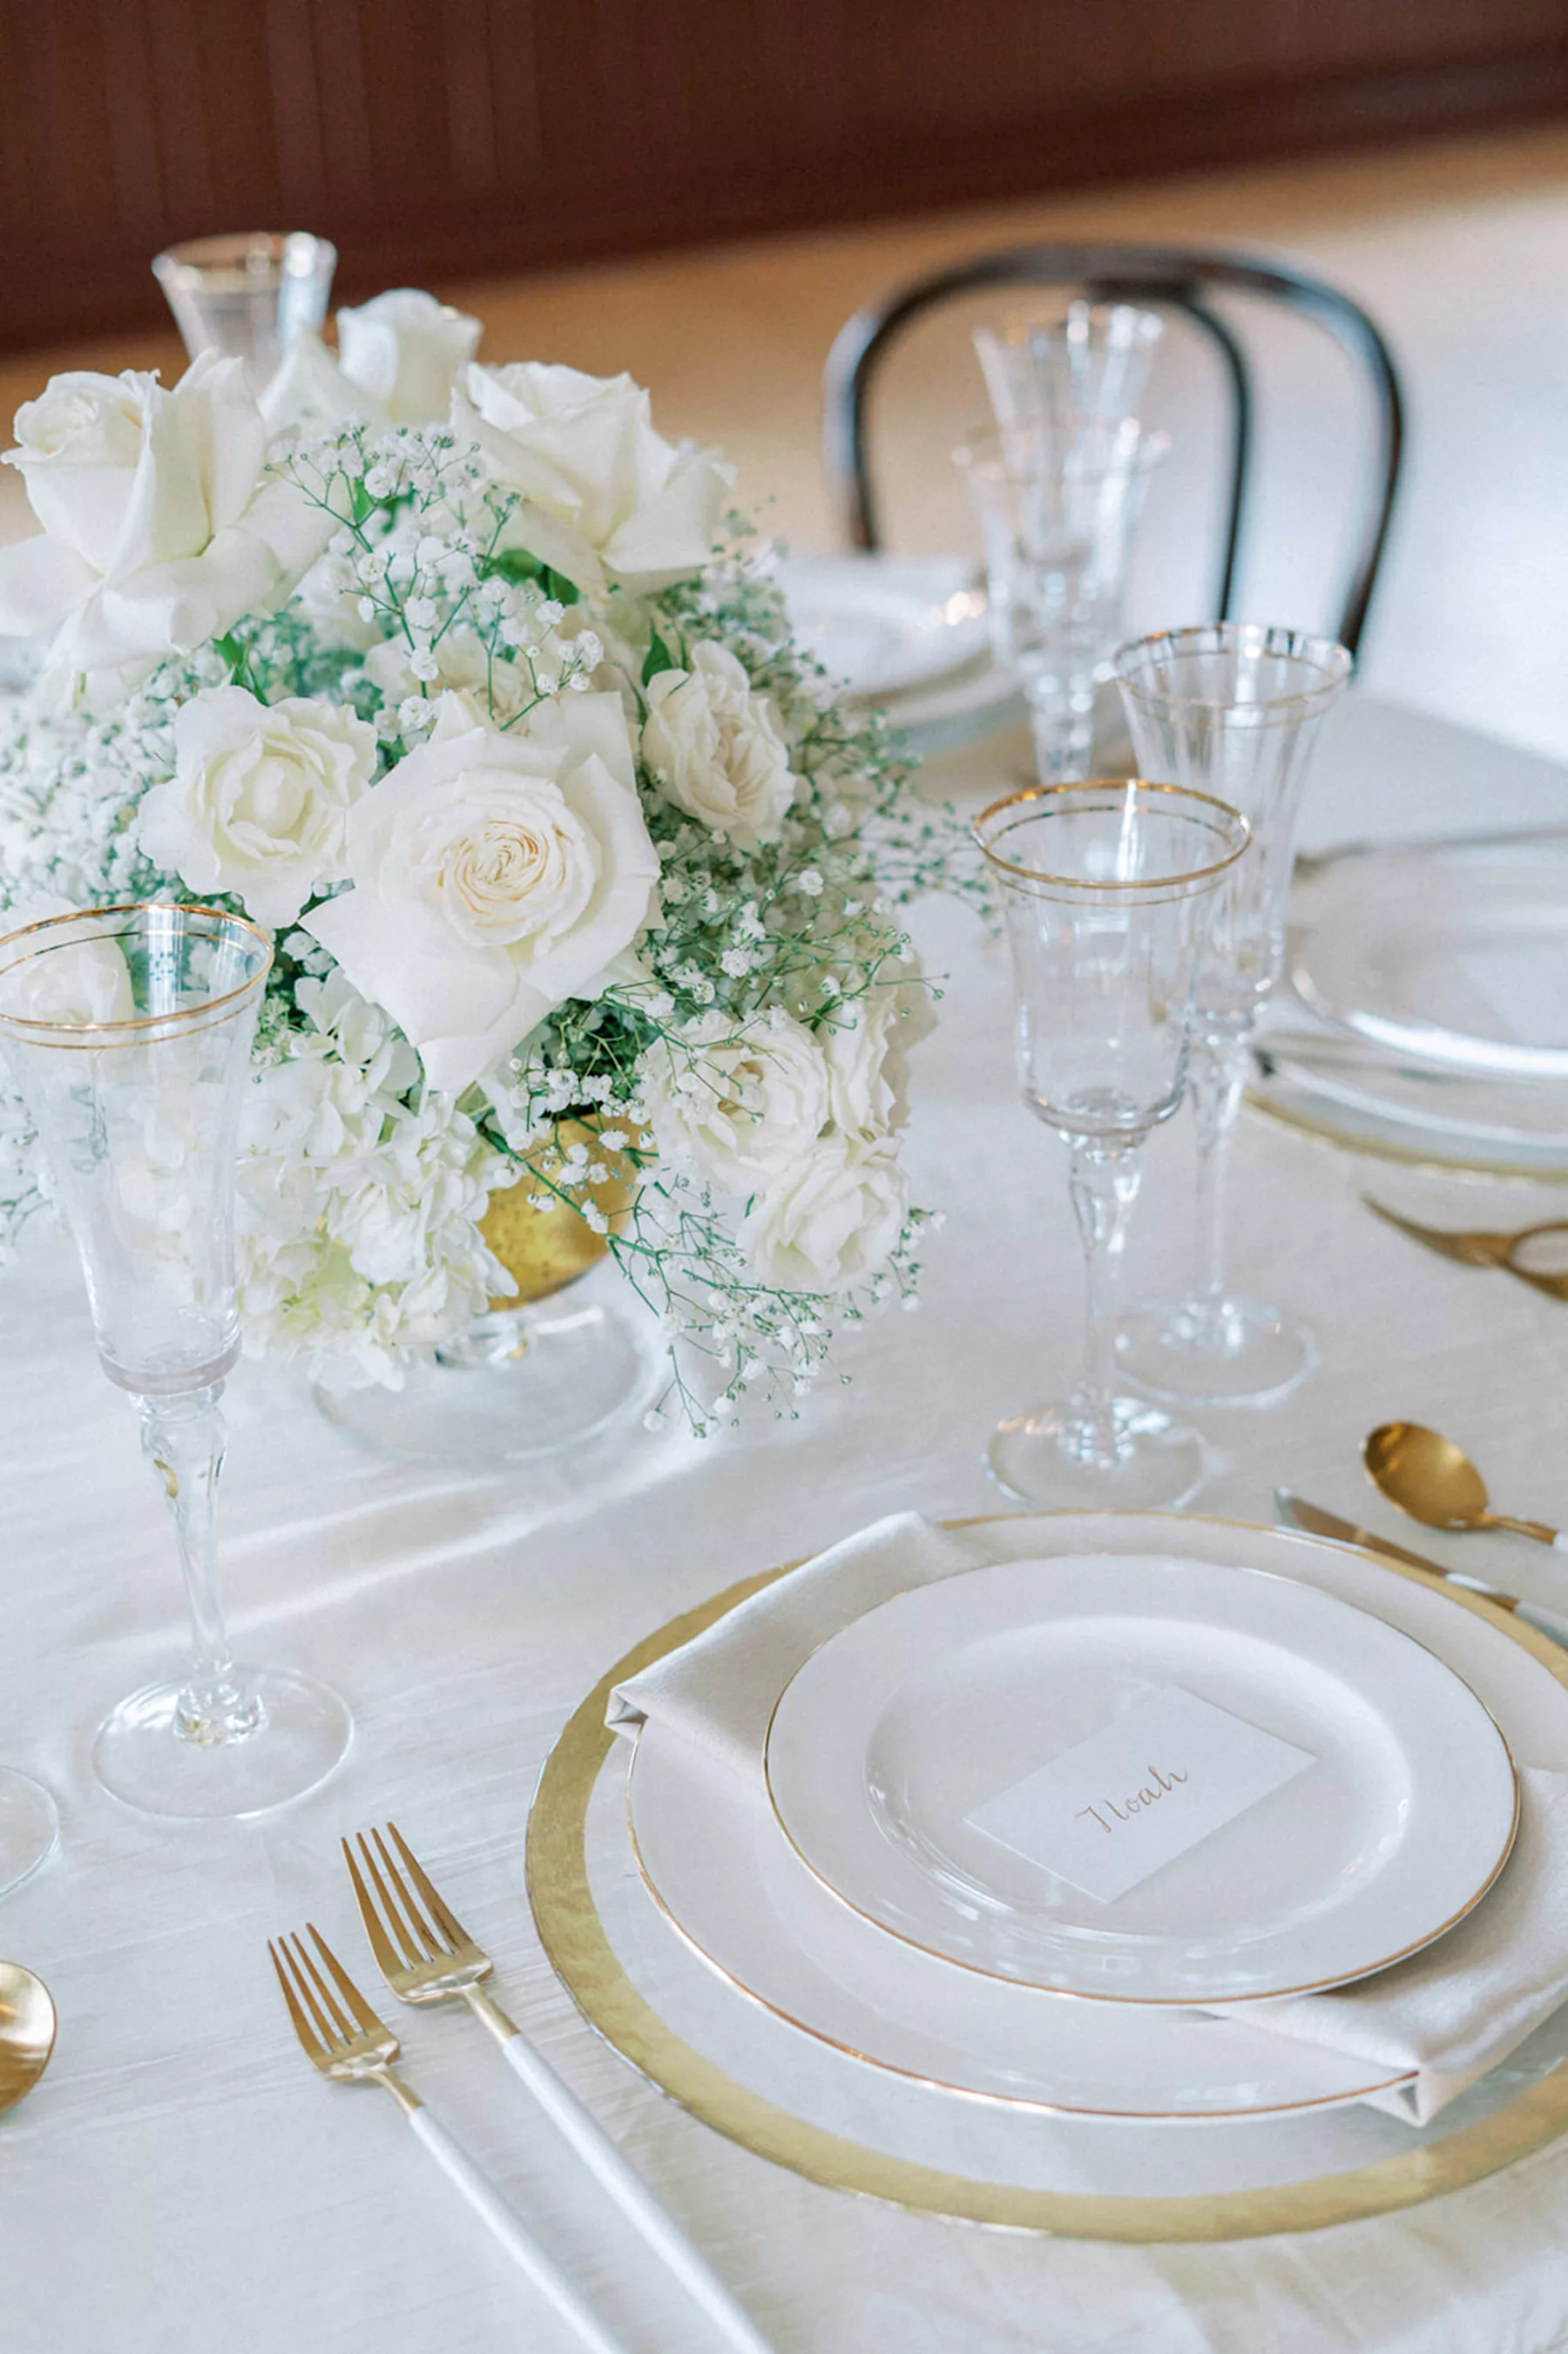 Modern White and Gold Wedding Reception Tablescape Ideas | Monochromatic White Rose and Baby's Breath Centerpiece Decor Inspiration | Tampa Bay Photographer Eddy Almaguer Photography | Ybor Kate Ryan Event Rentals